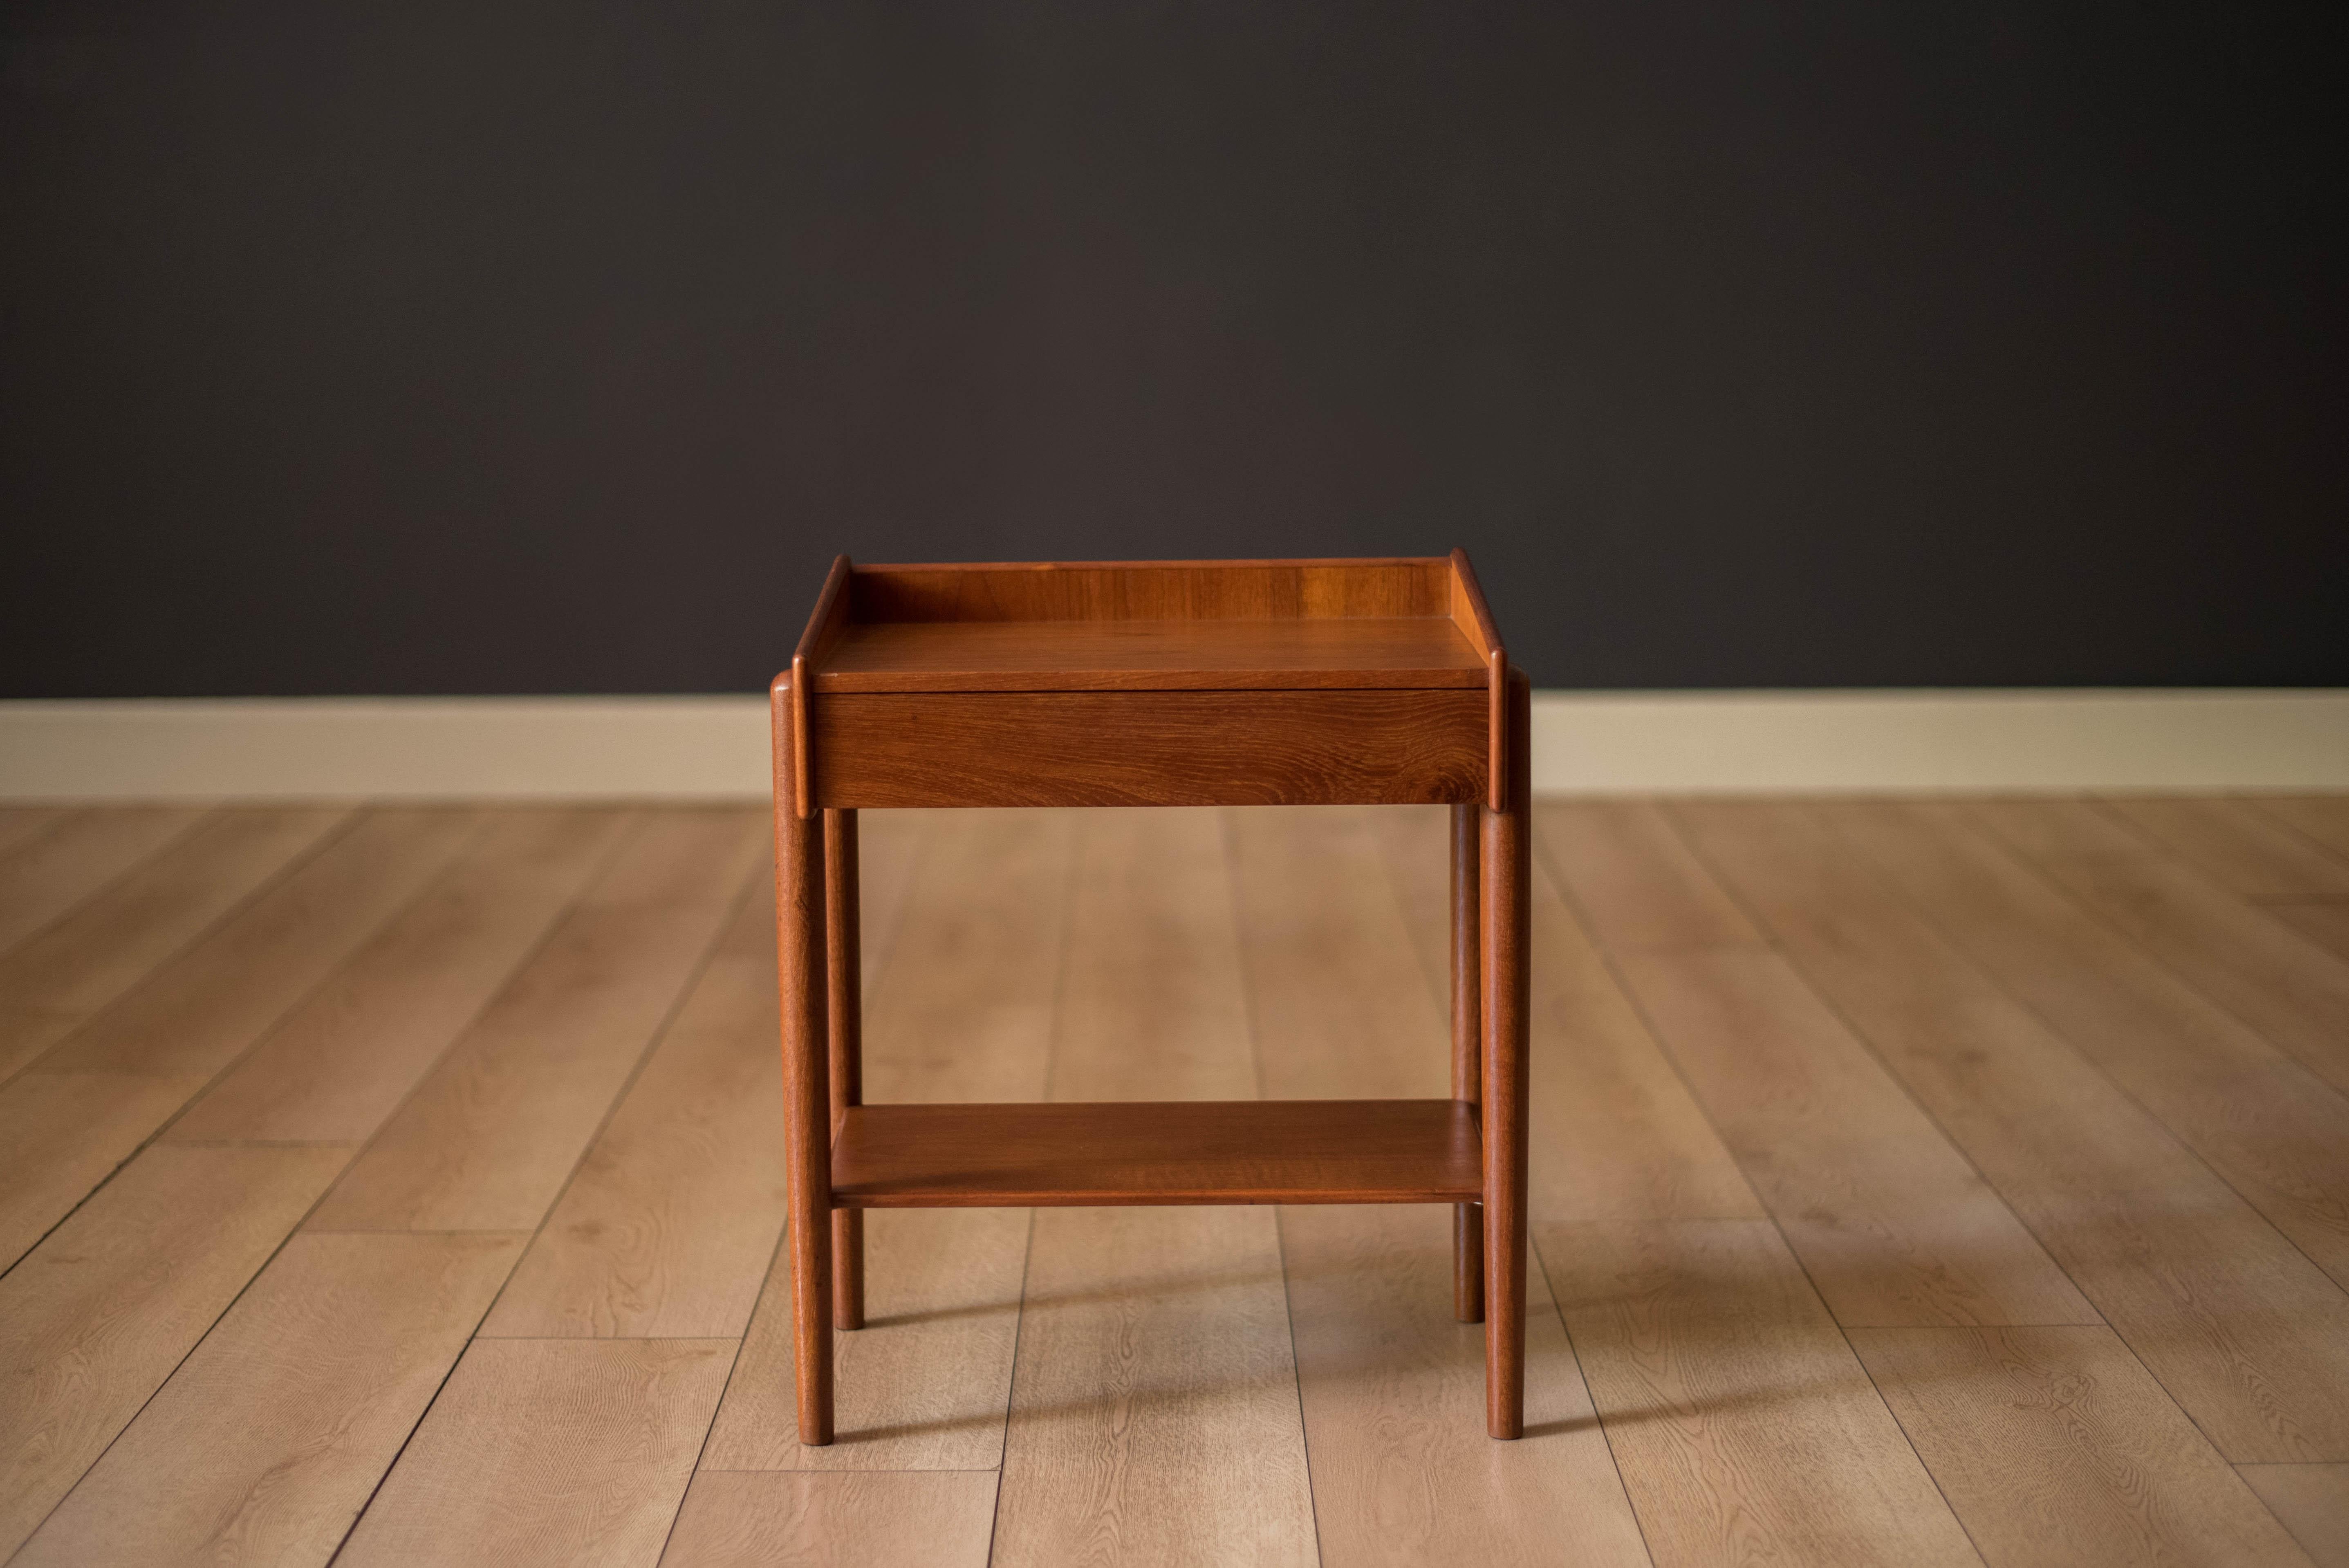 Mid-Century Modern bedside table nightstand designed by Borge Mogensen for Soborg Mobler, circa 1950s. This unique piece is made of old growth teak and features one dovetail drawer and a lower tier shelf for extra storage. Complete with a finished